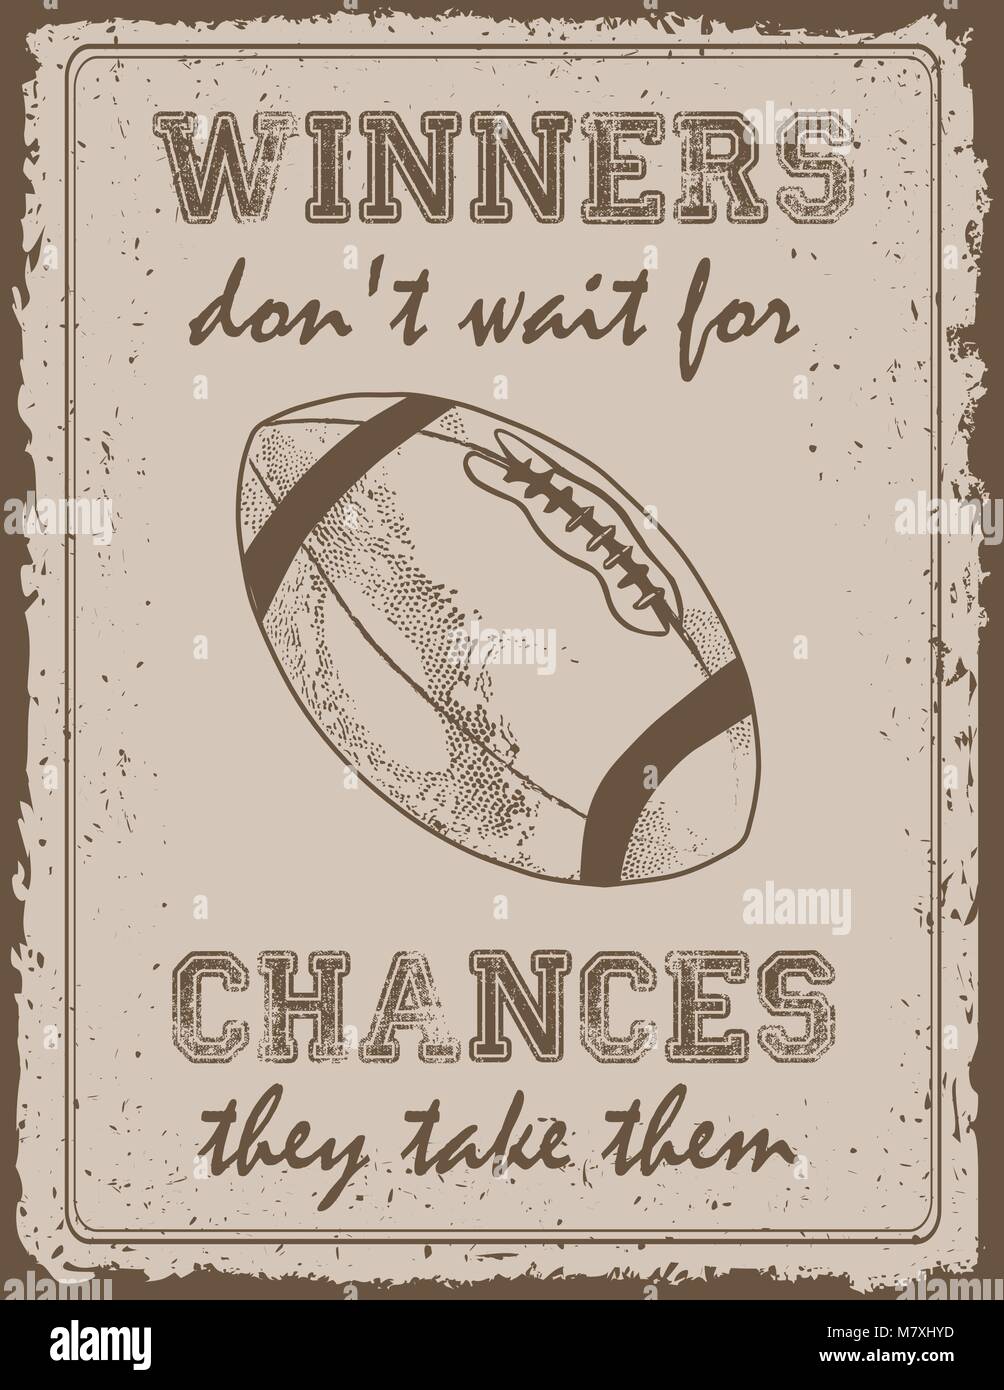 MOTIVATIONAL QUOTE POSTER PRINT PICTURE FANTASTIC RUGBY INSPIRATIONAL